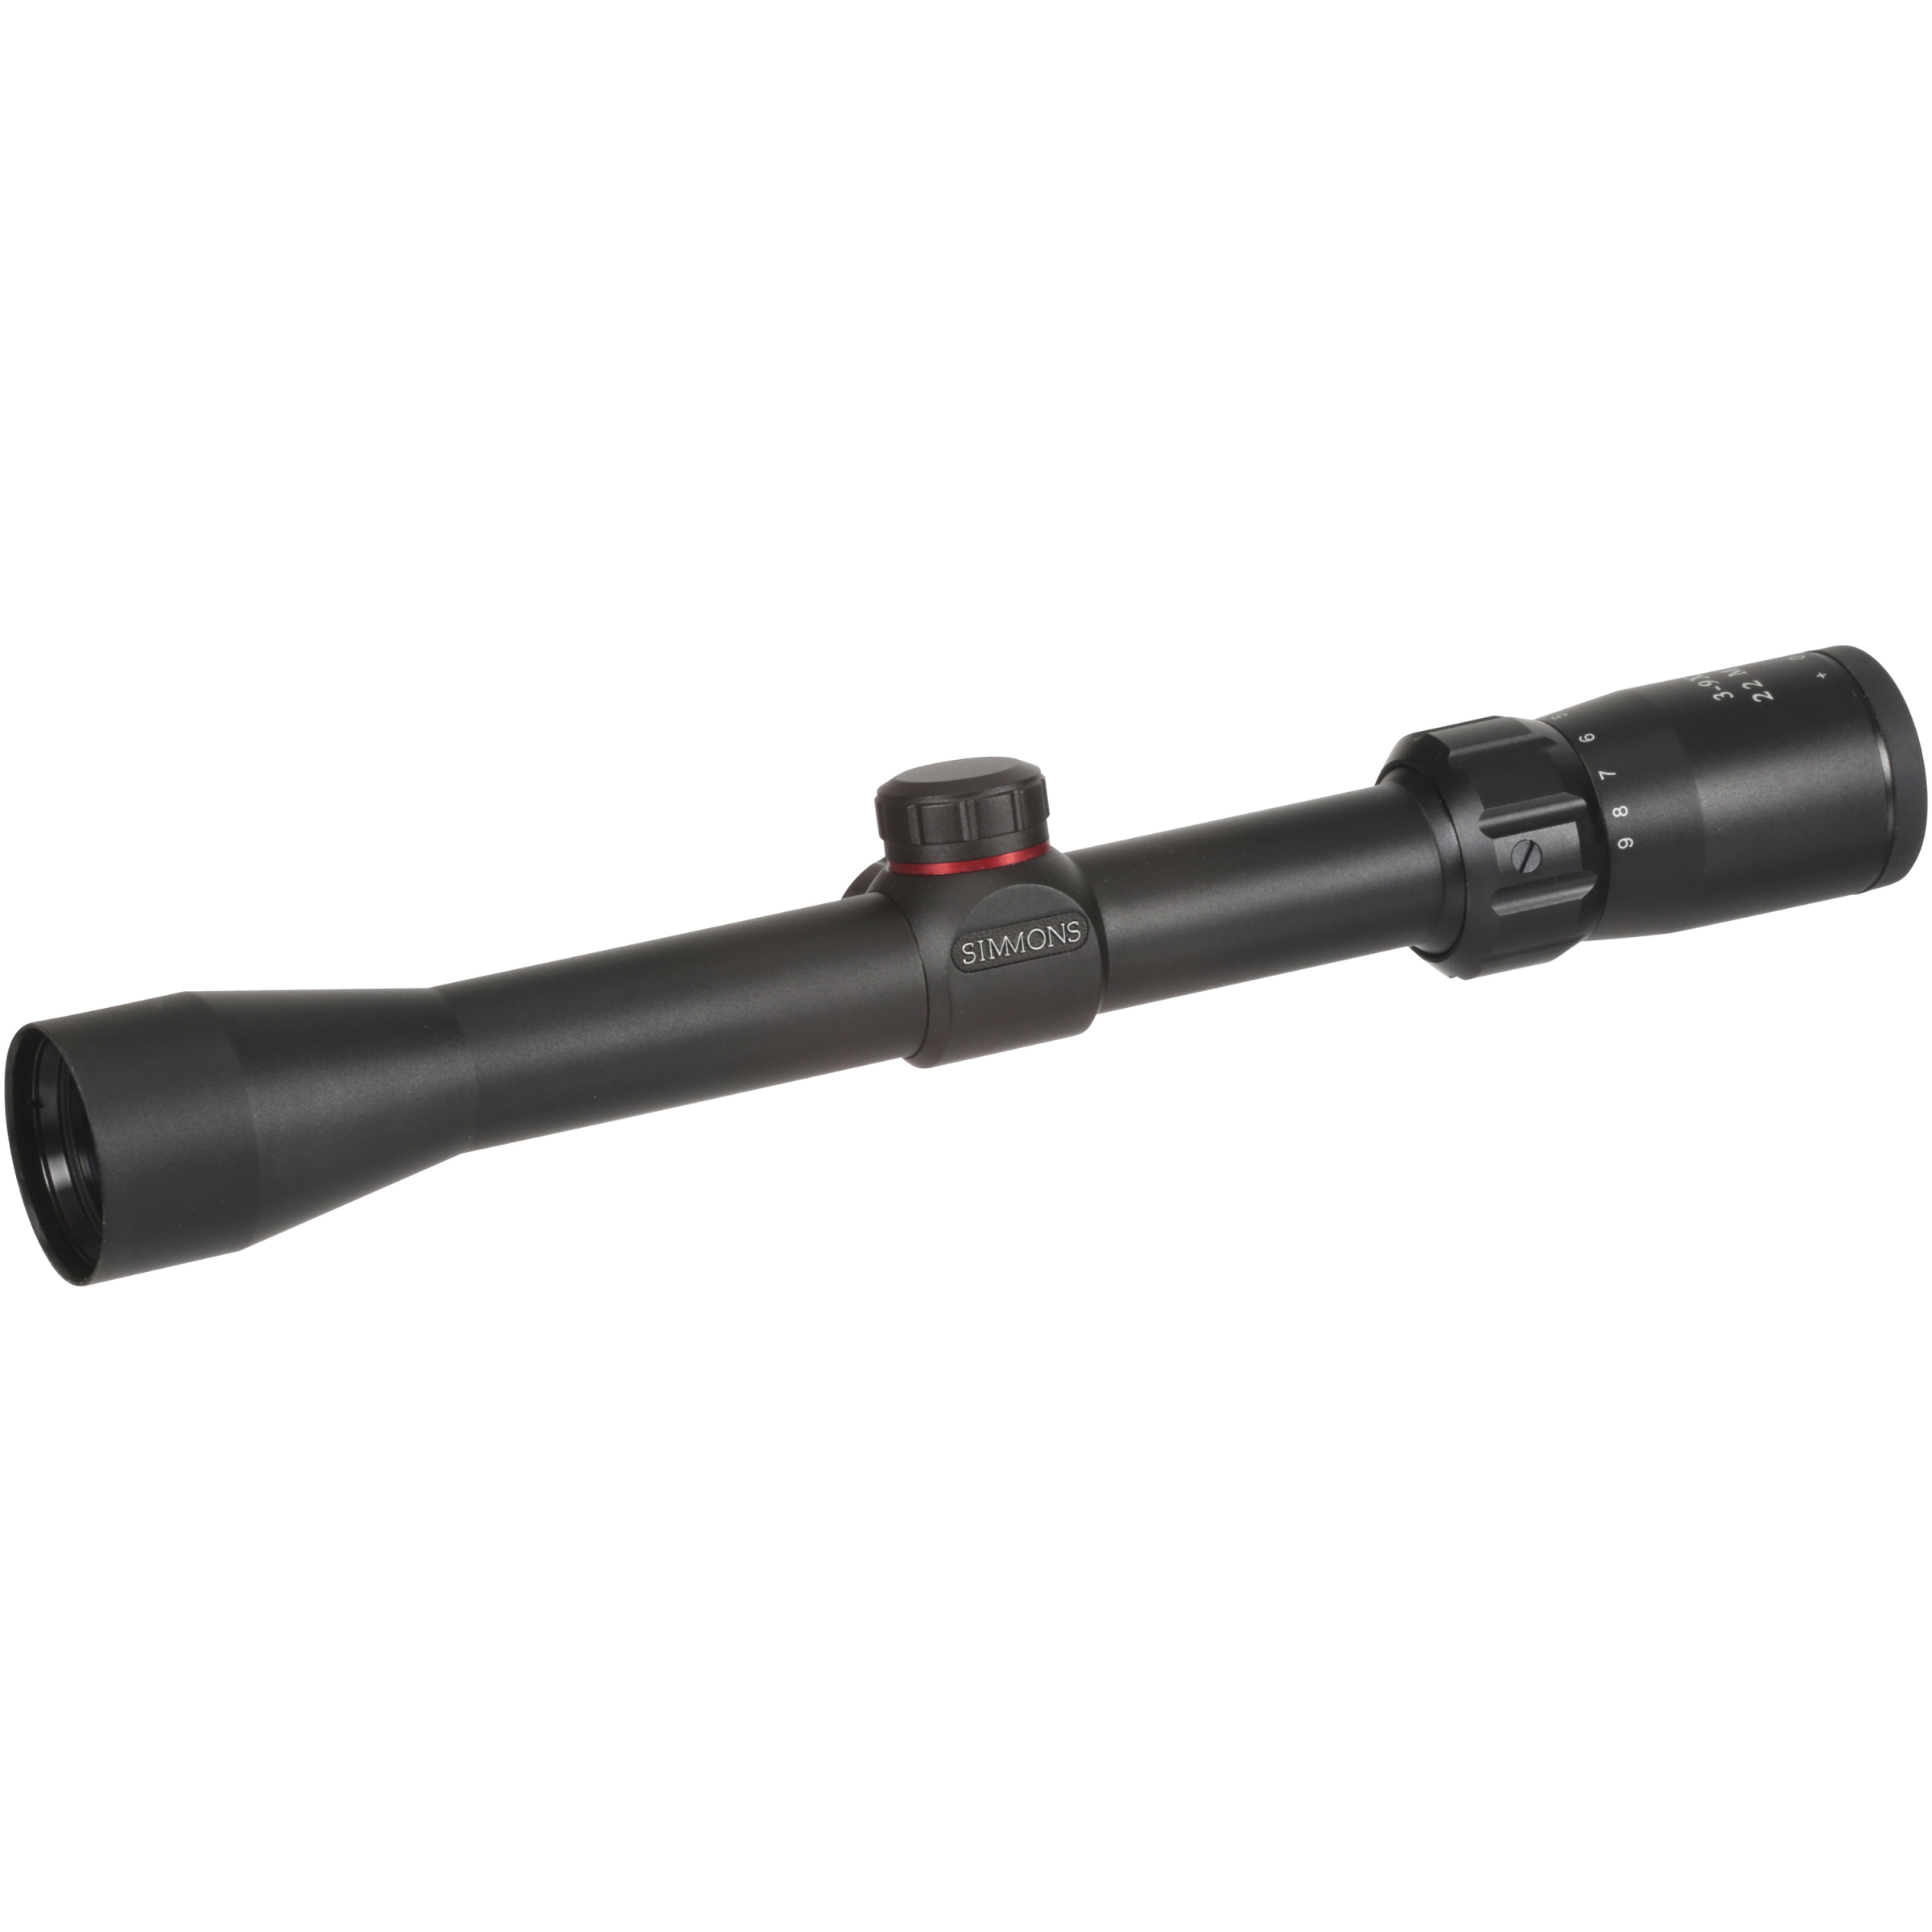 Simmons 22 Mag Riflescope, Truplex Reticle with Rings, Matte Black - image 1 of 4